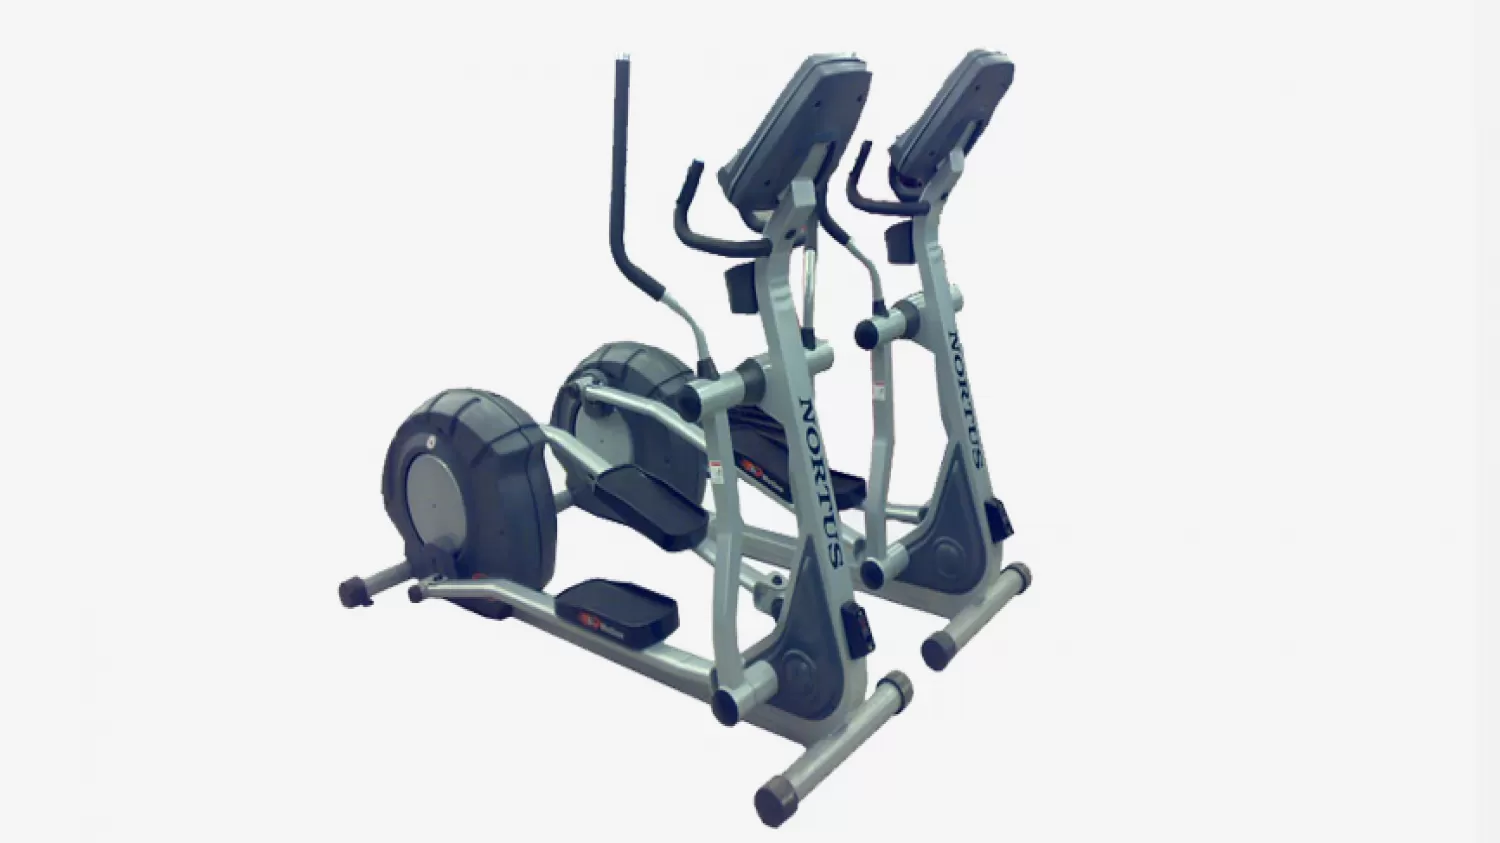 What Else You Need To Know About Commercial Elliptical Machines?